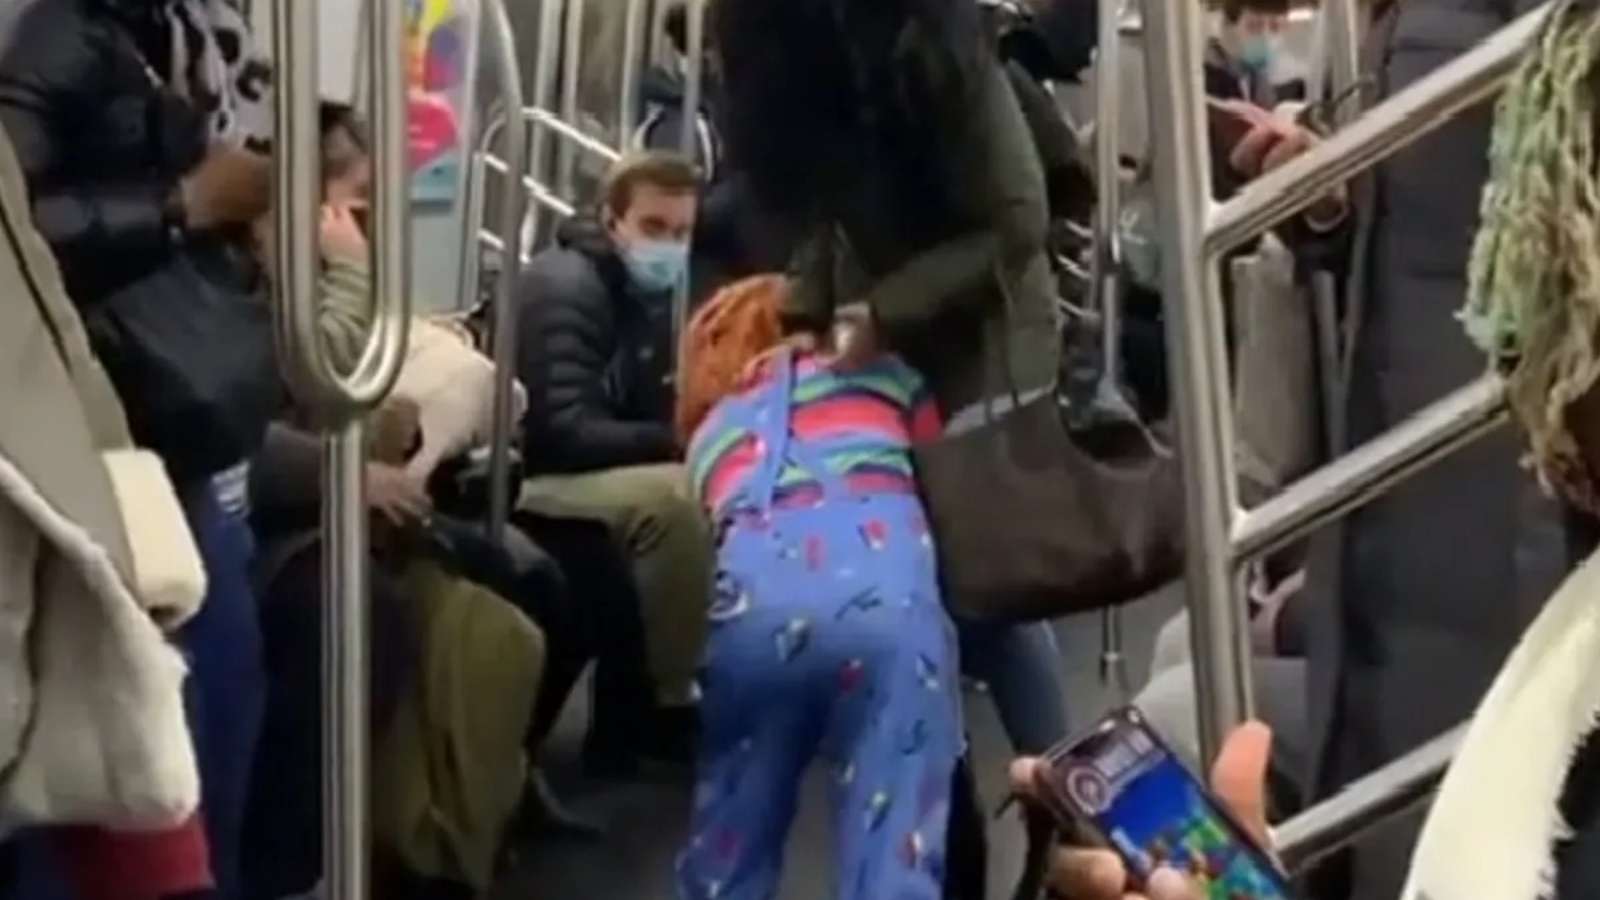 Chucky's Attack On The Subway Was Planned As A "Social Experiment."